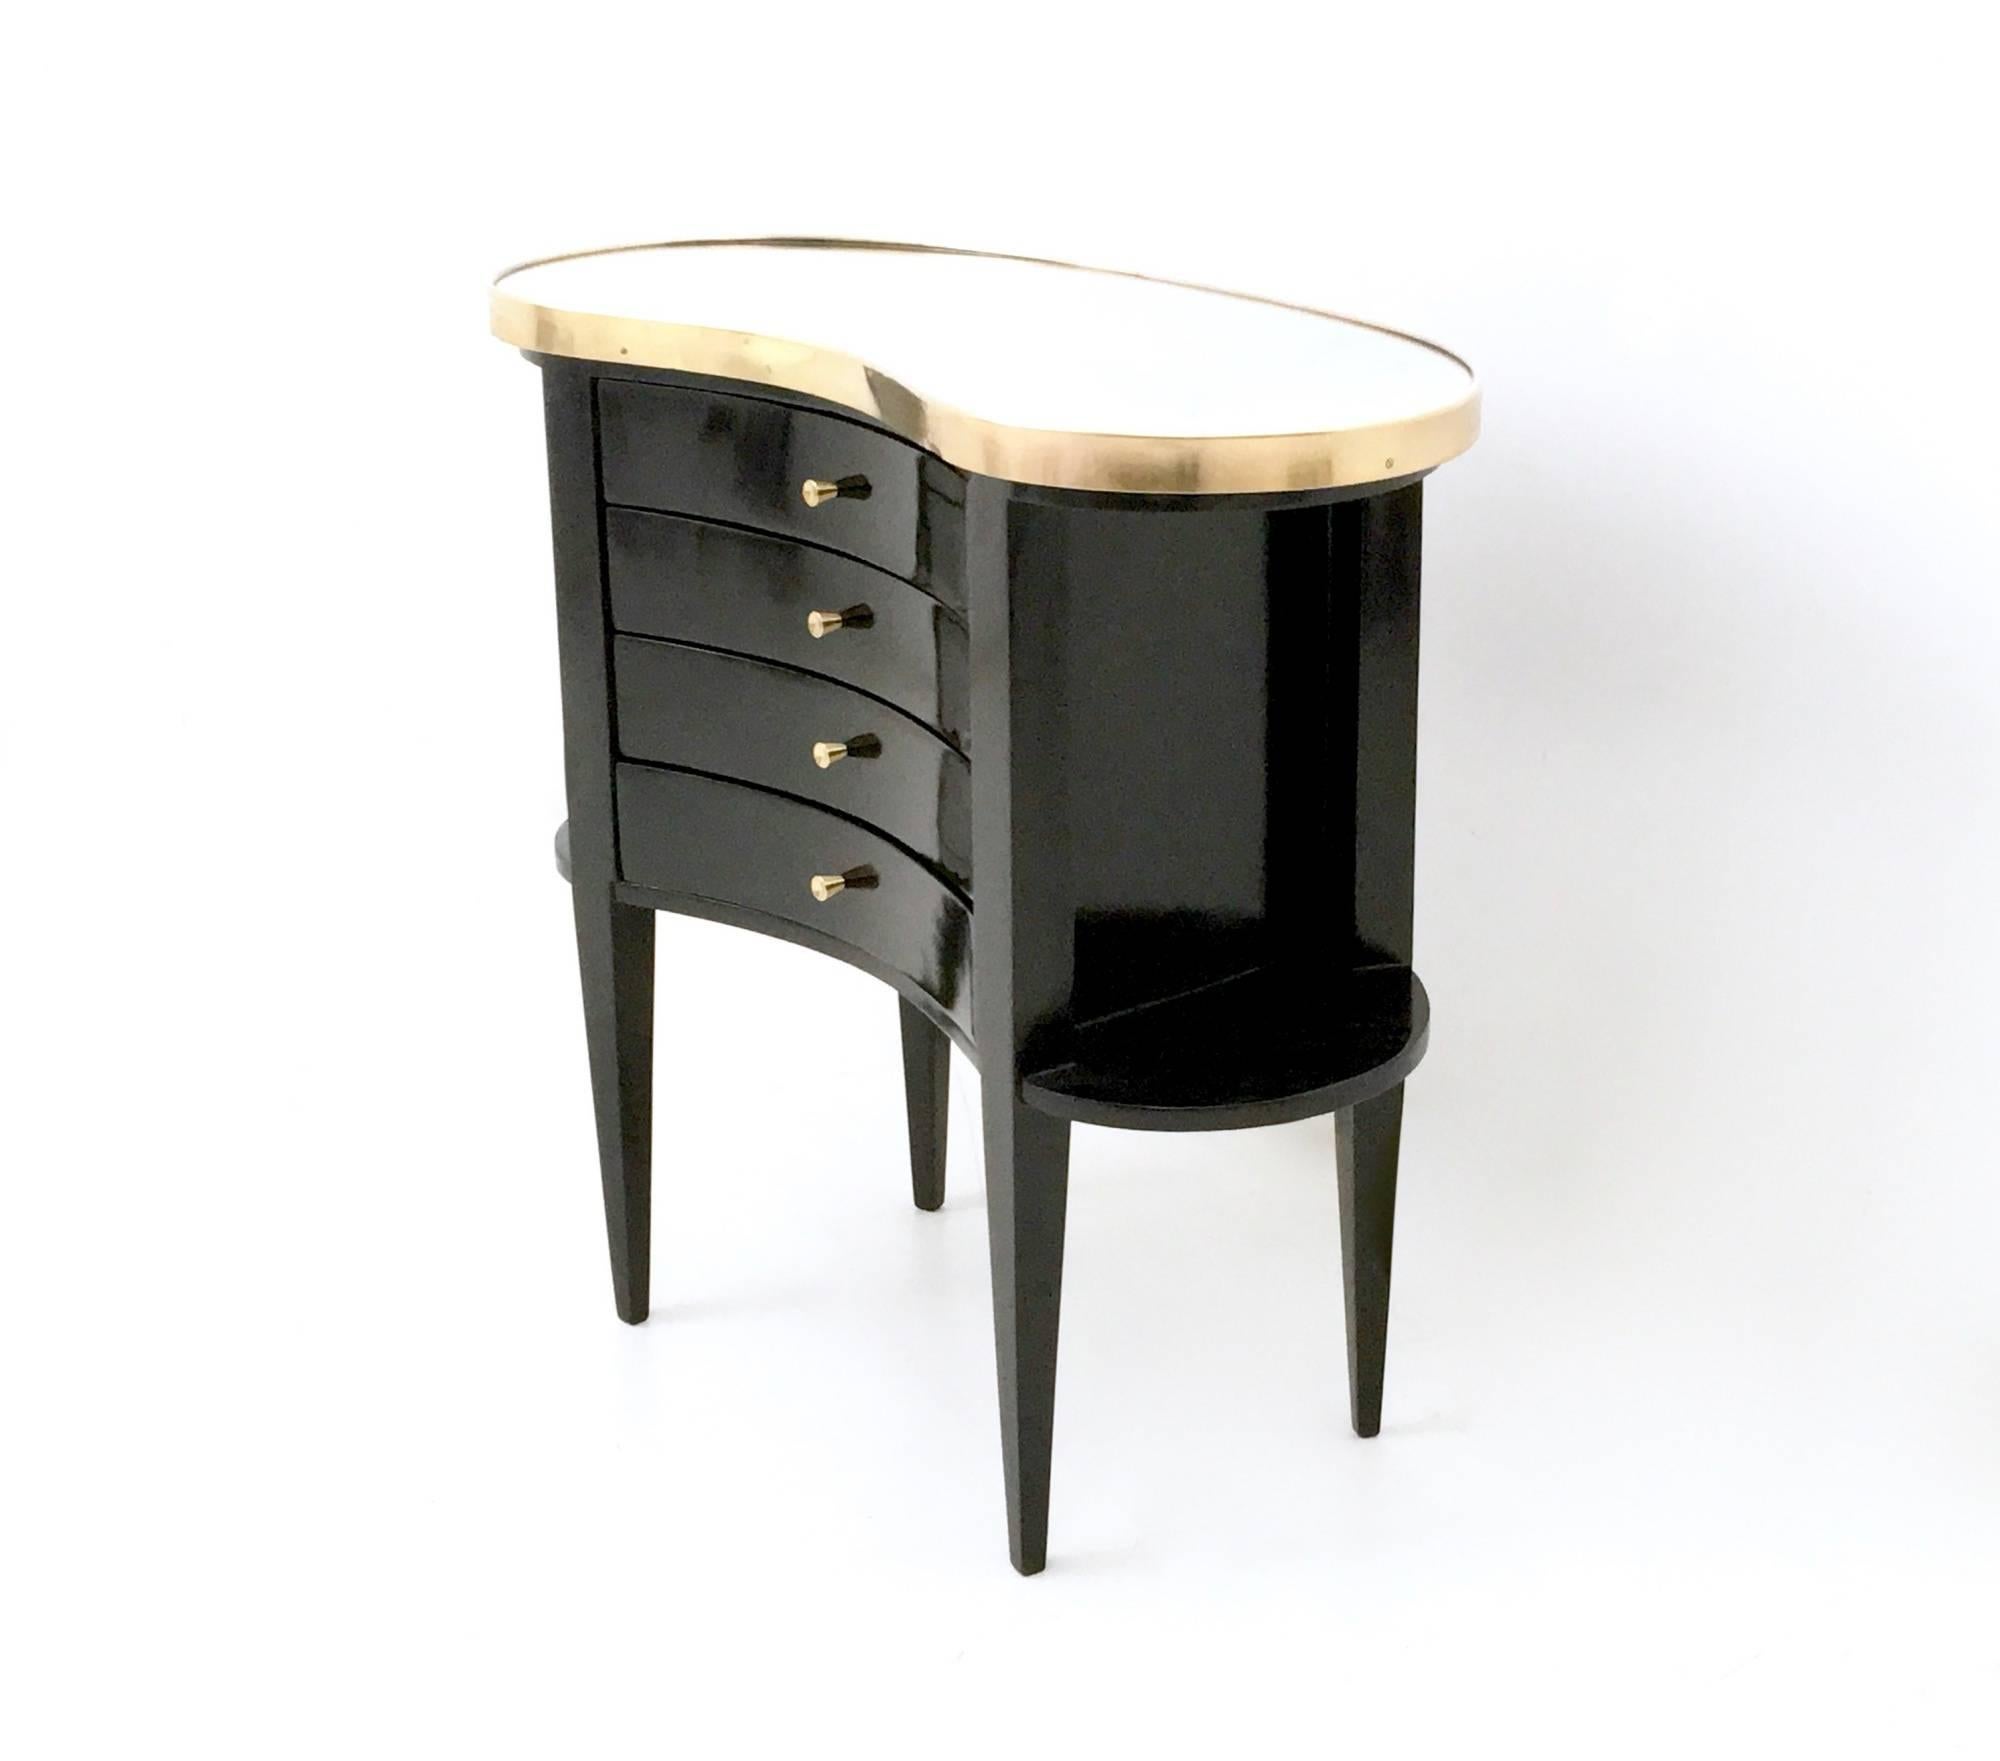 It is made in black lacquered wood and features a mirrored glass top, which is framed by brass.
The top has two slight traces of oxidation. 
It has been restored and it is in such perfect condition that it's ready to become a piece in a home.